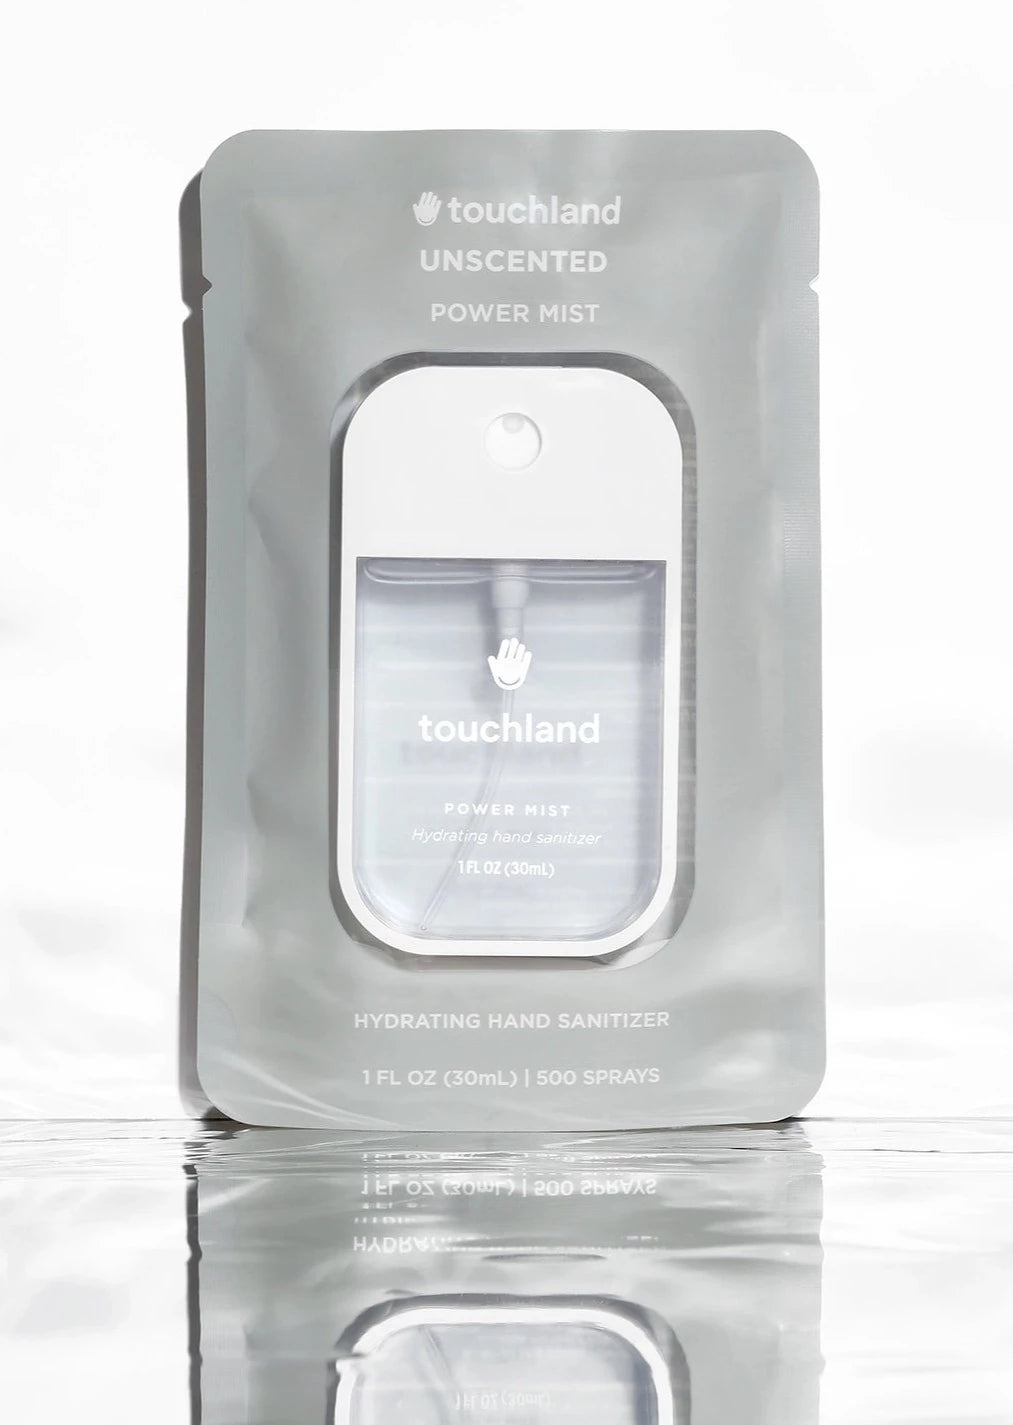 Touchland: Unscented Power Mist